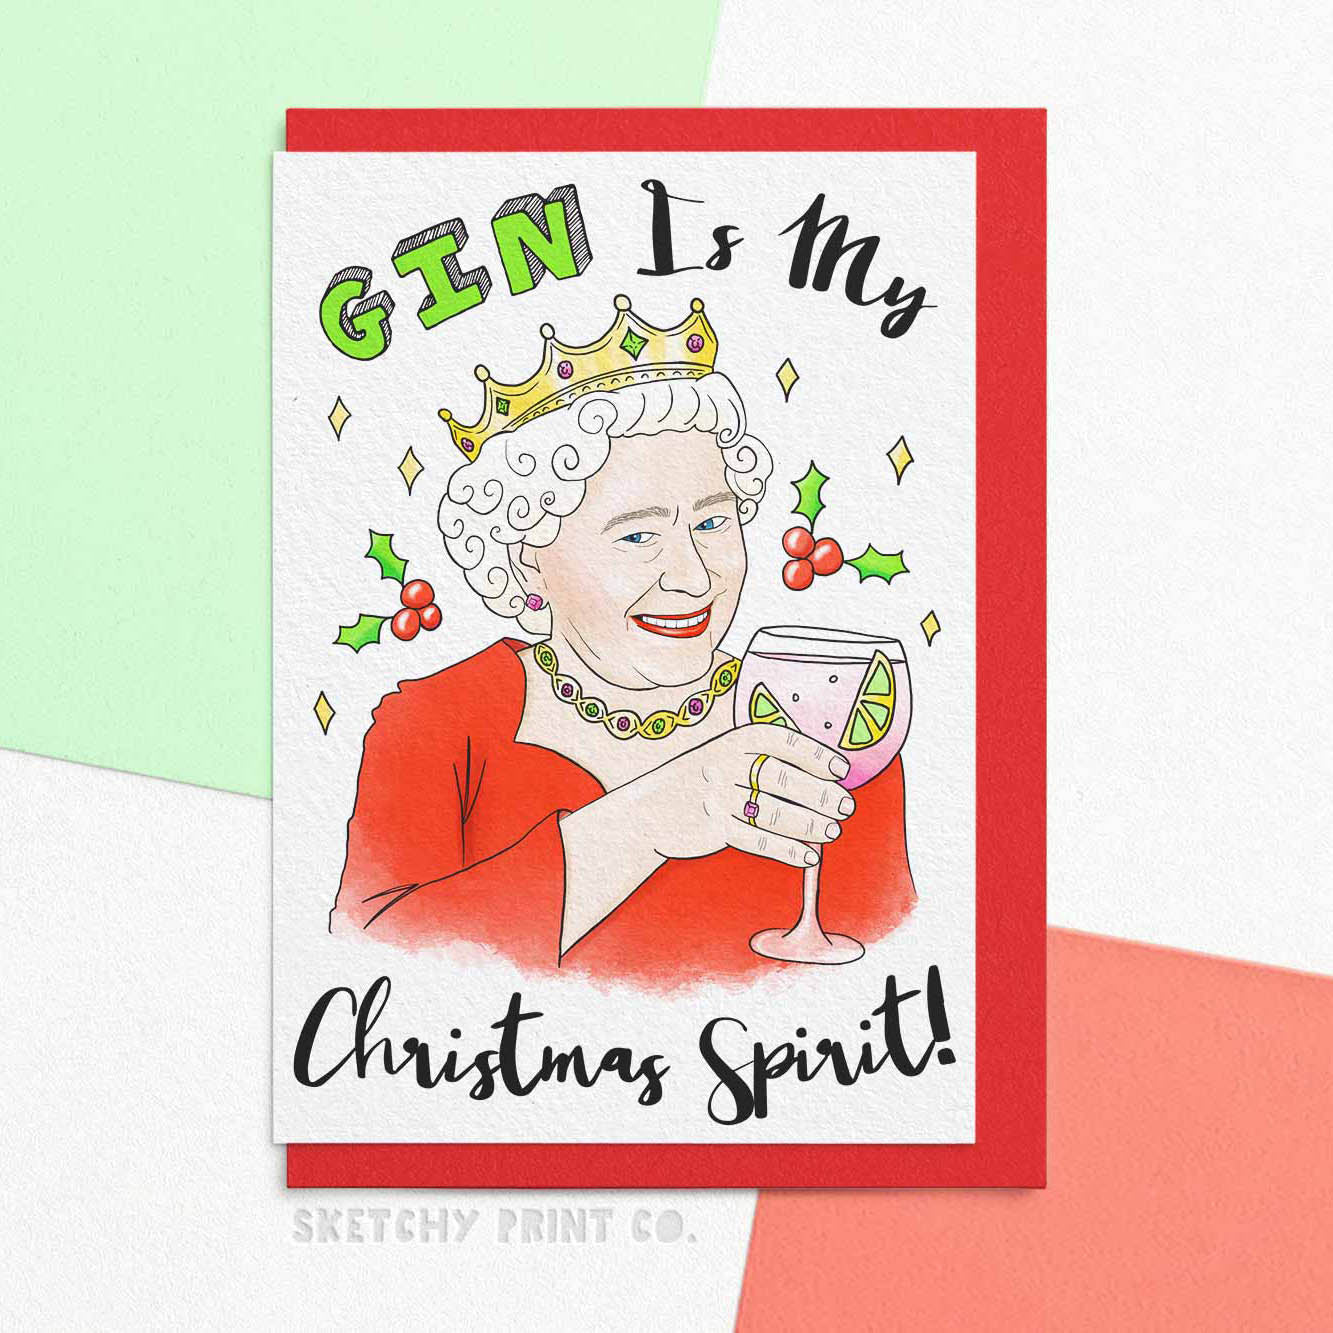 Funny Christmas Cards The Queen Gin Mum girlfriend unique gift unusual hilarious illustrated sketchy print co